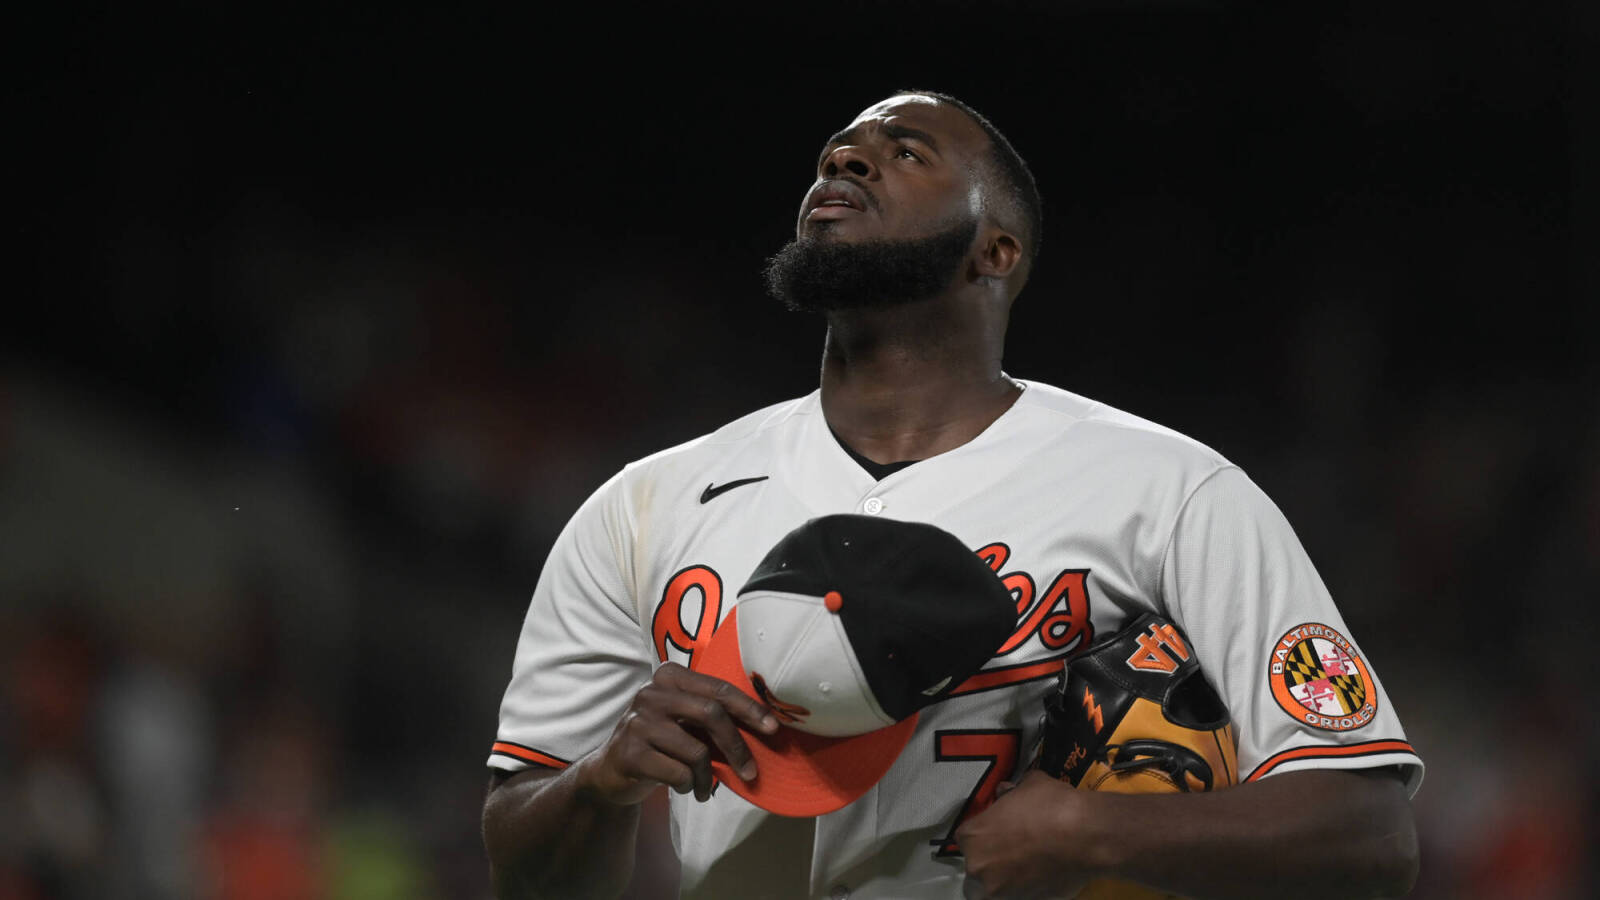 Orioles All-Star closer leaves game with 'arm discomfort'